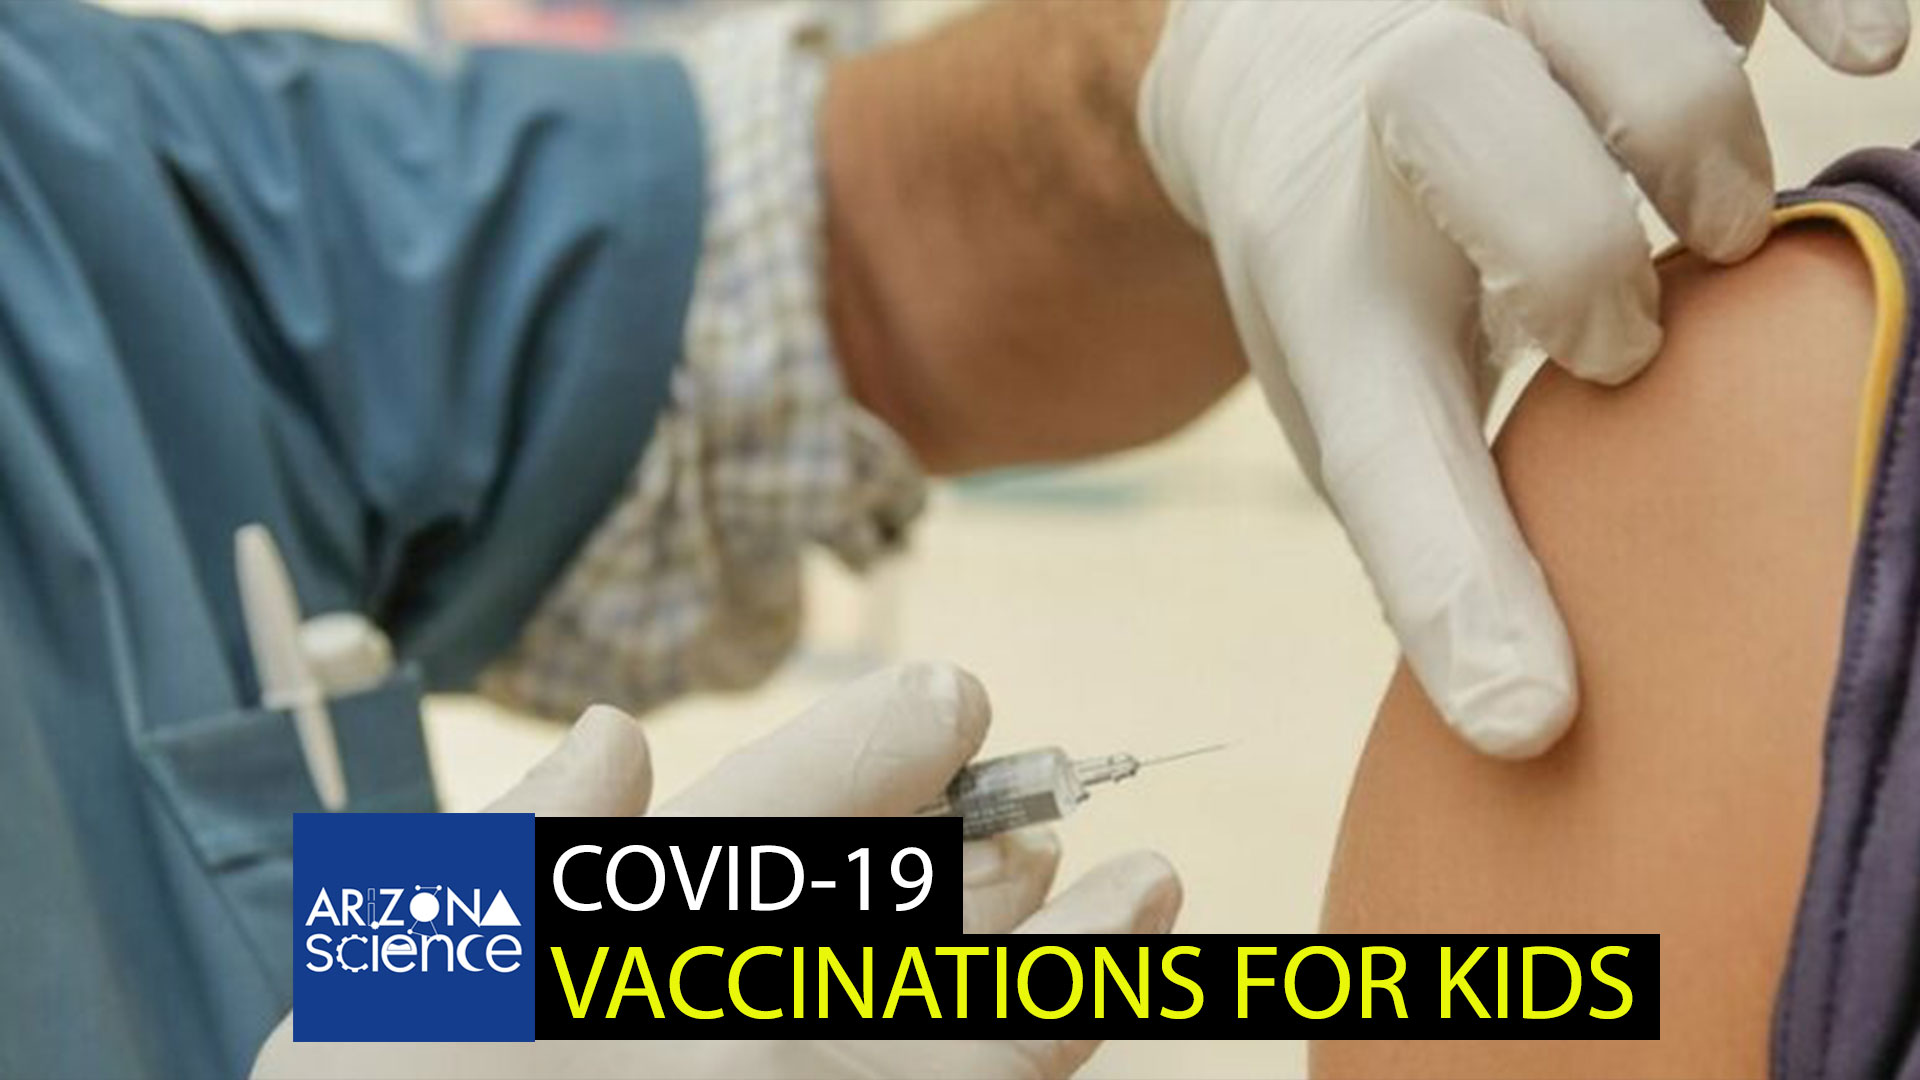 Child receives COVID-19 vaccination.